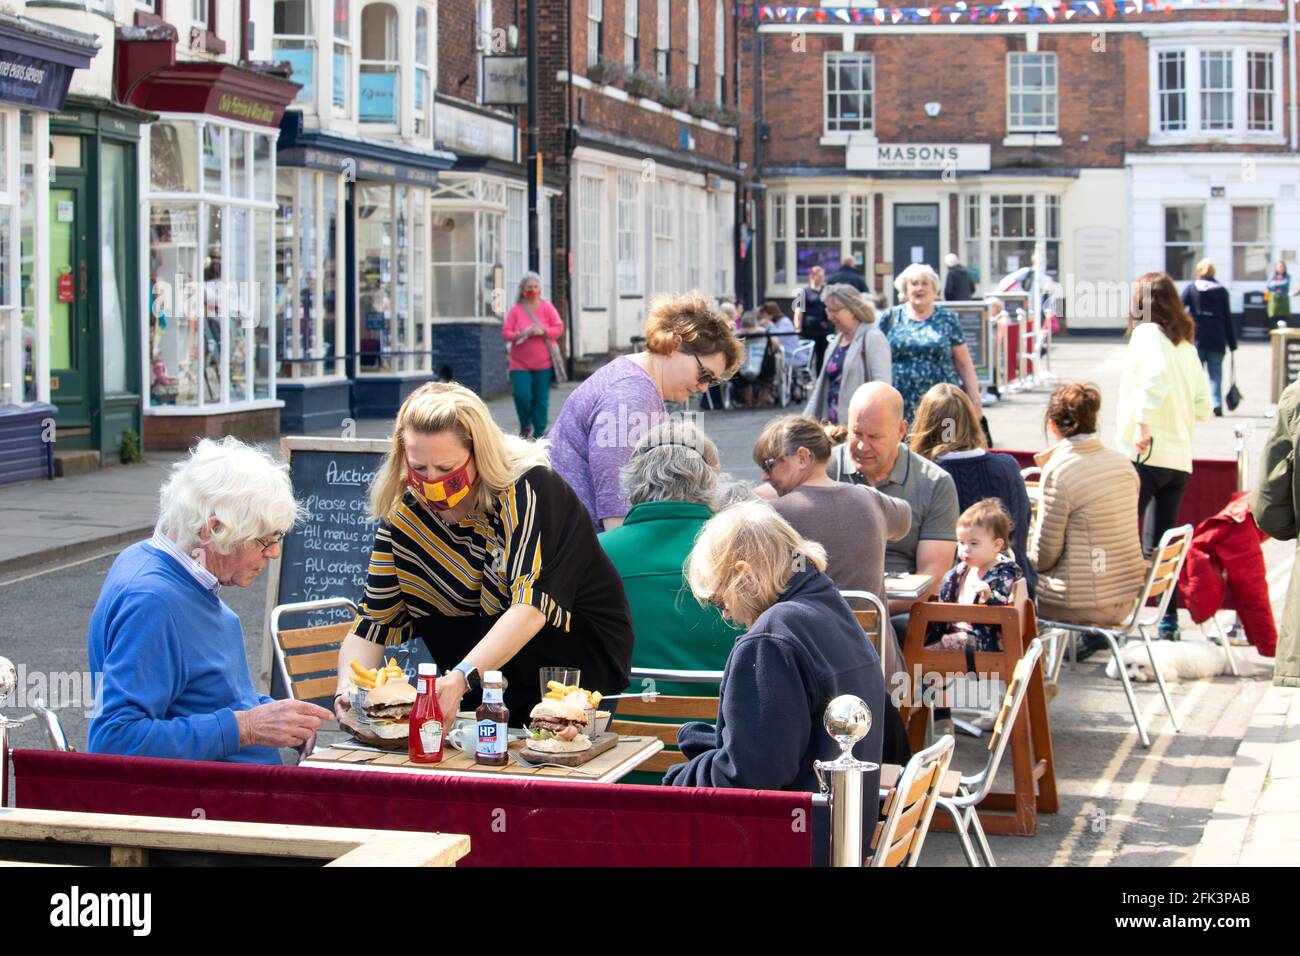 People eating outside in the cormarket area of louth, Lincolnshire during Covid restrictions in April 2021 Stock Photo